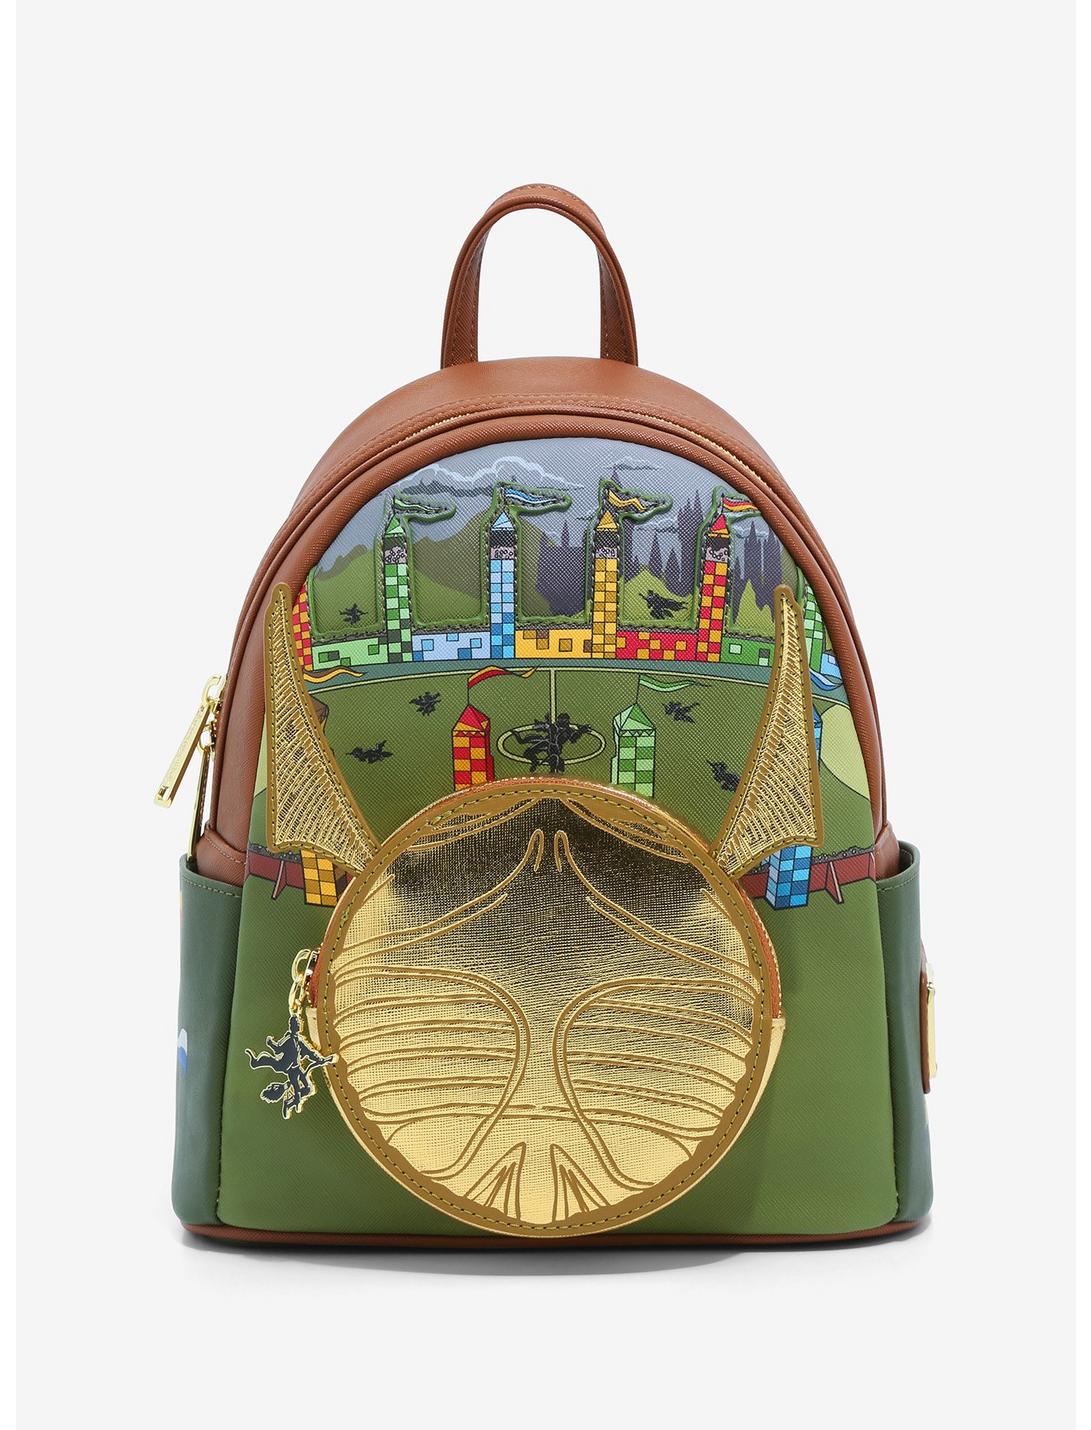 Loungefly Harry Potter Quidditch Mini Backpack, , hi-res